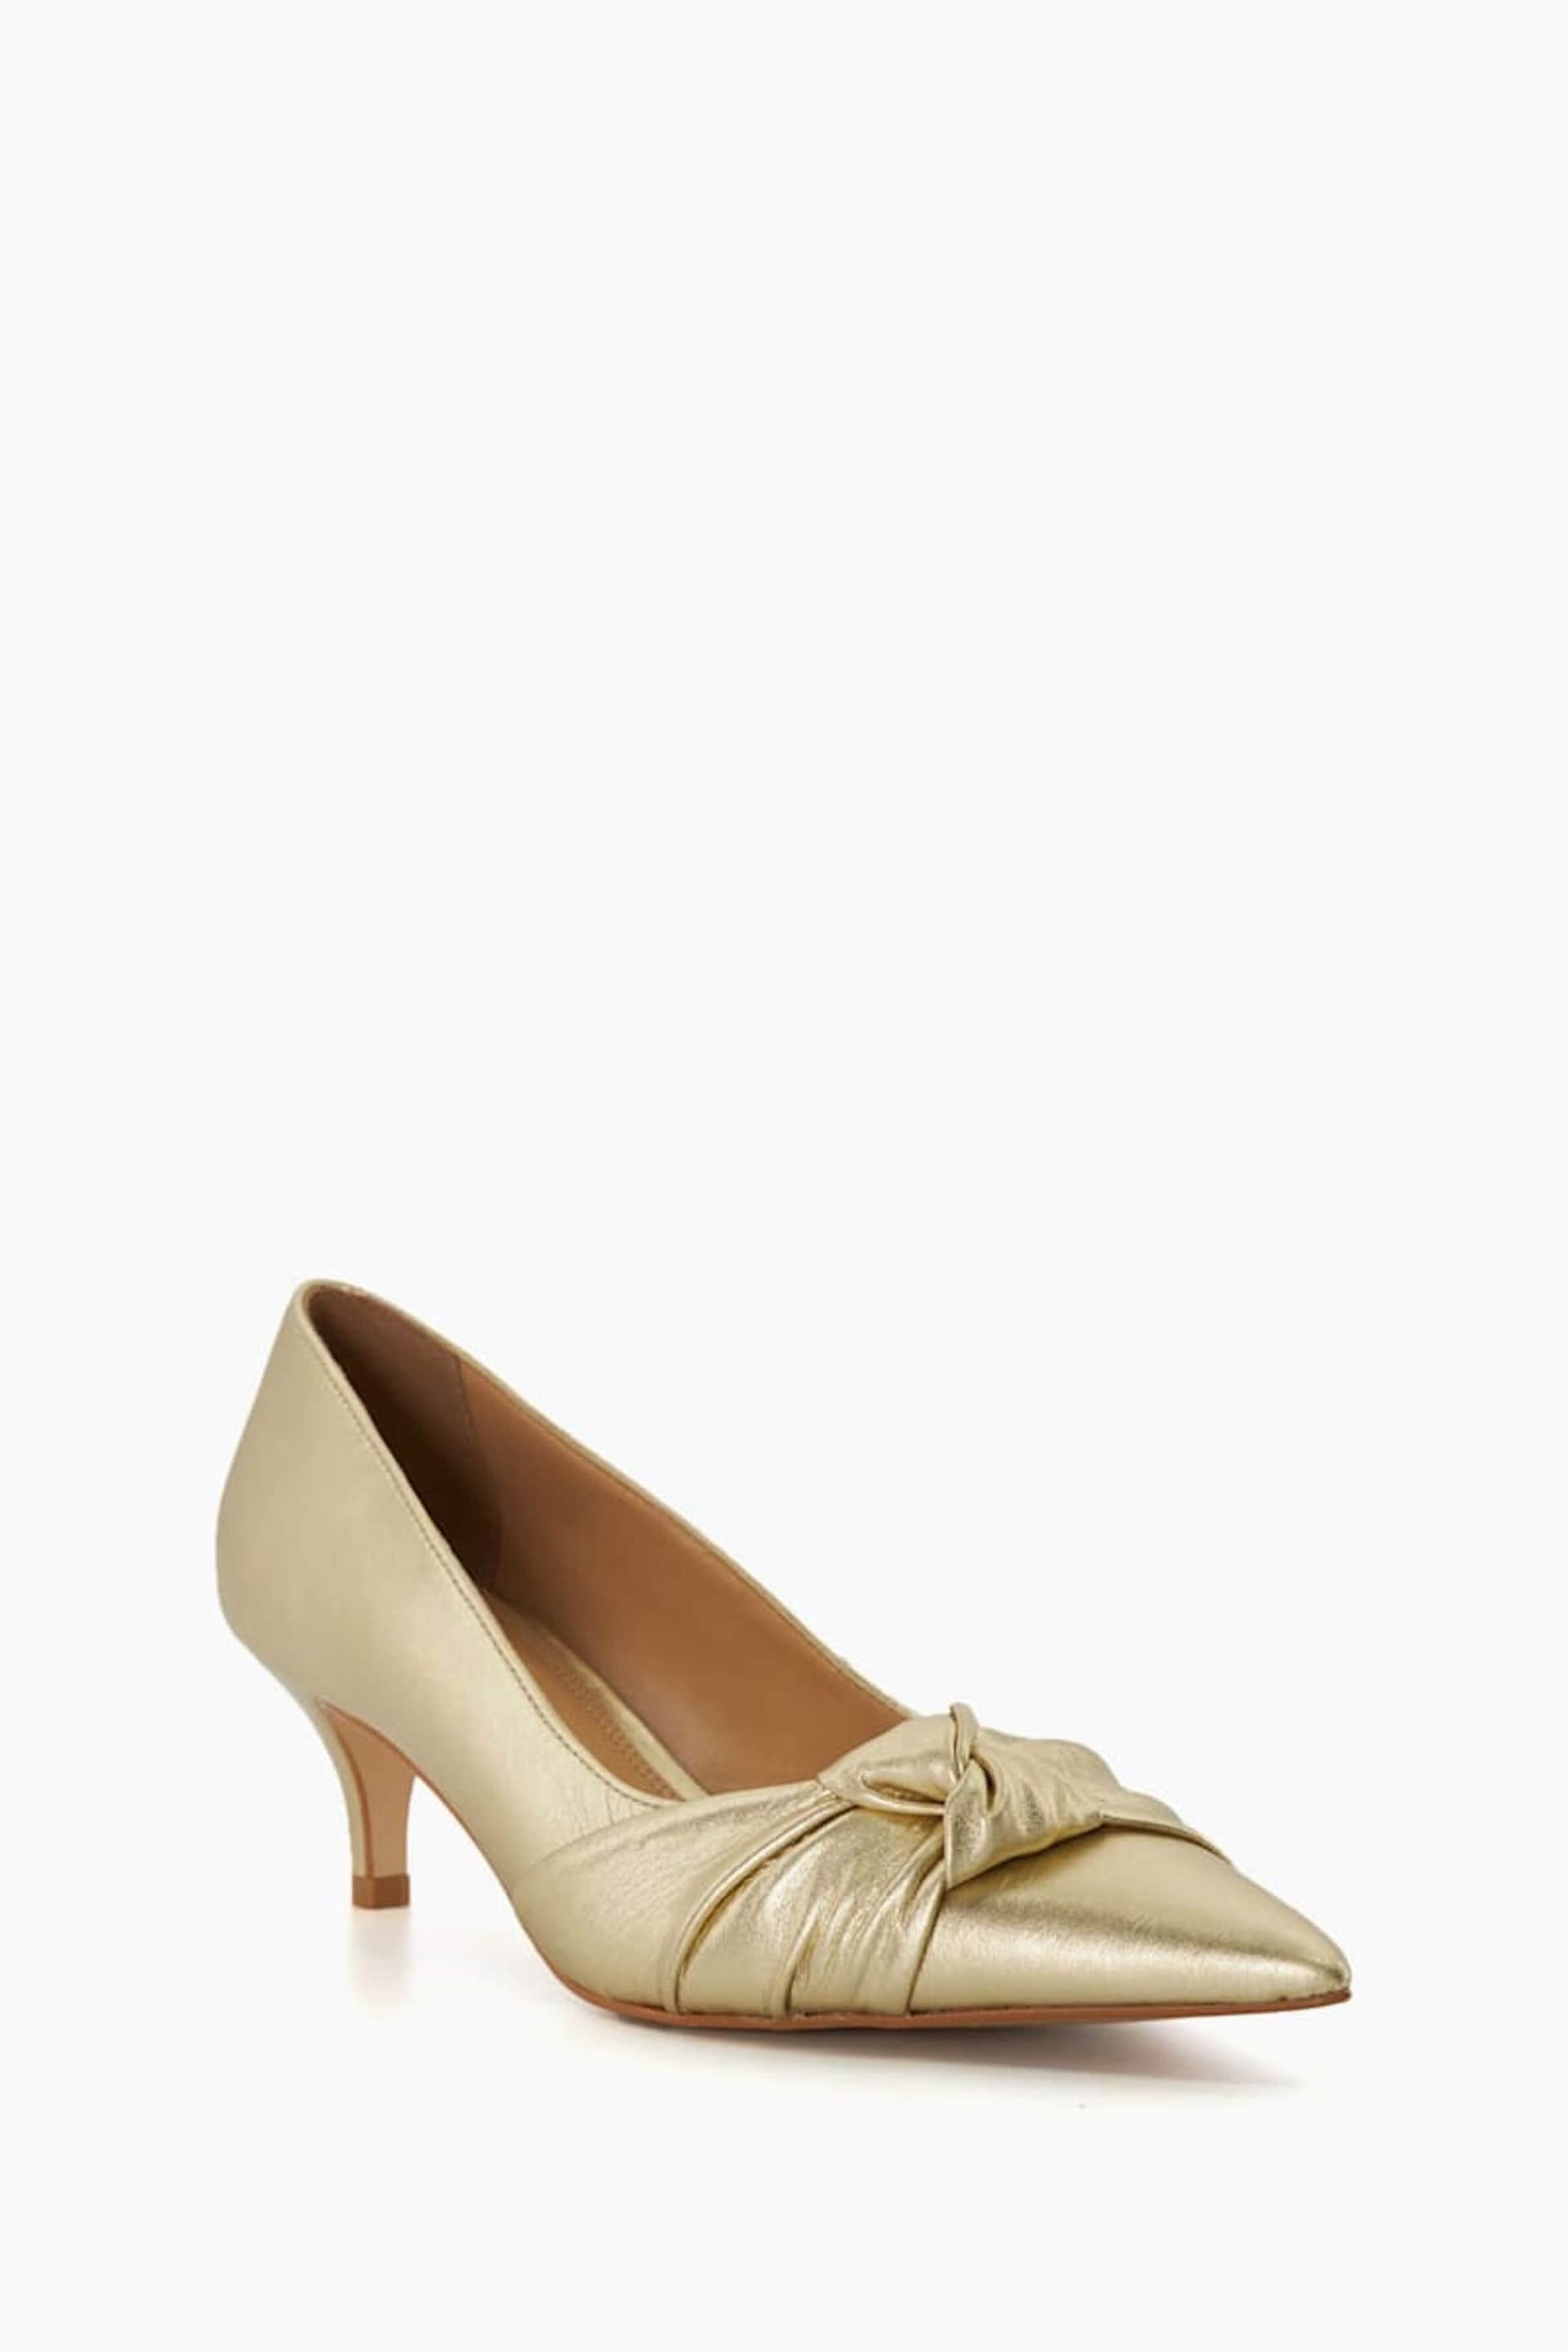 Dune London Gold Address Soft Knot Pointed Court Shoes - Image 4 of 6